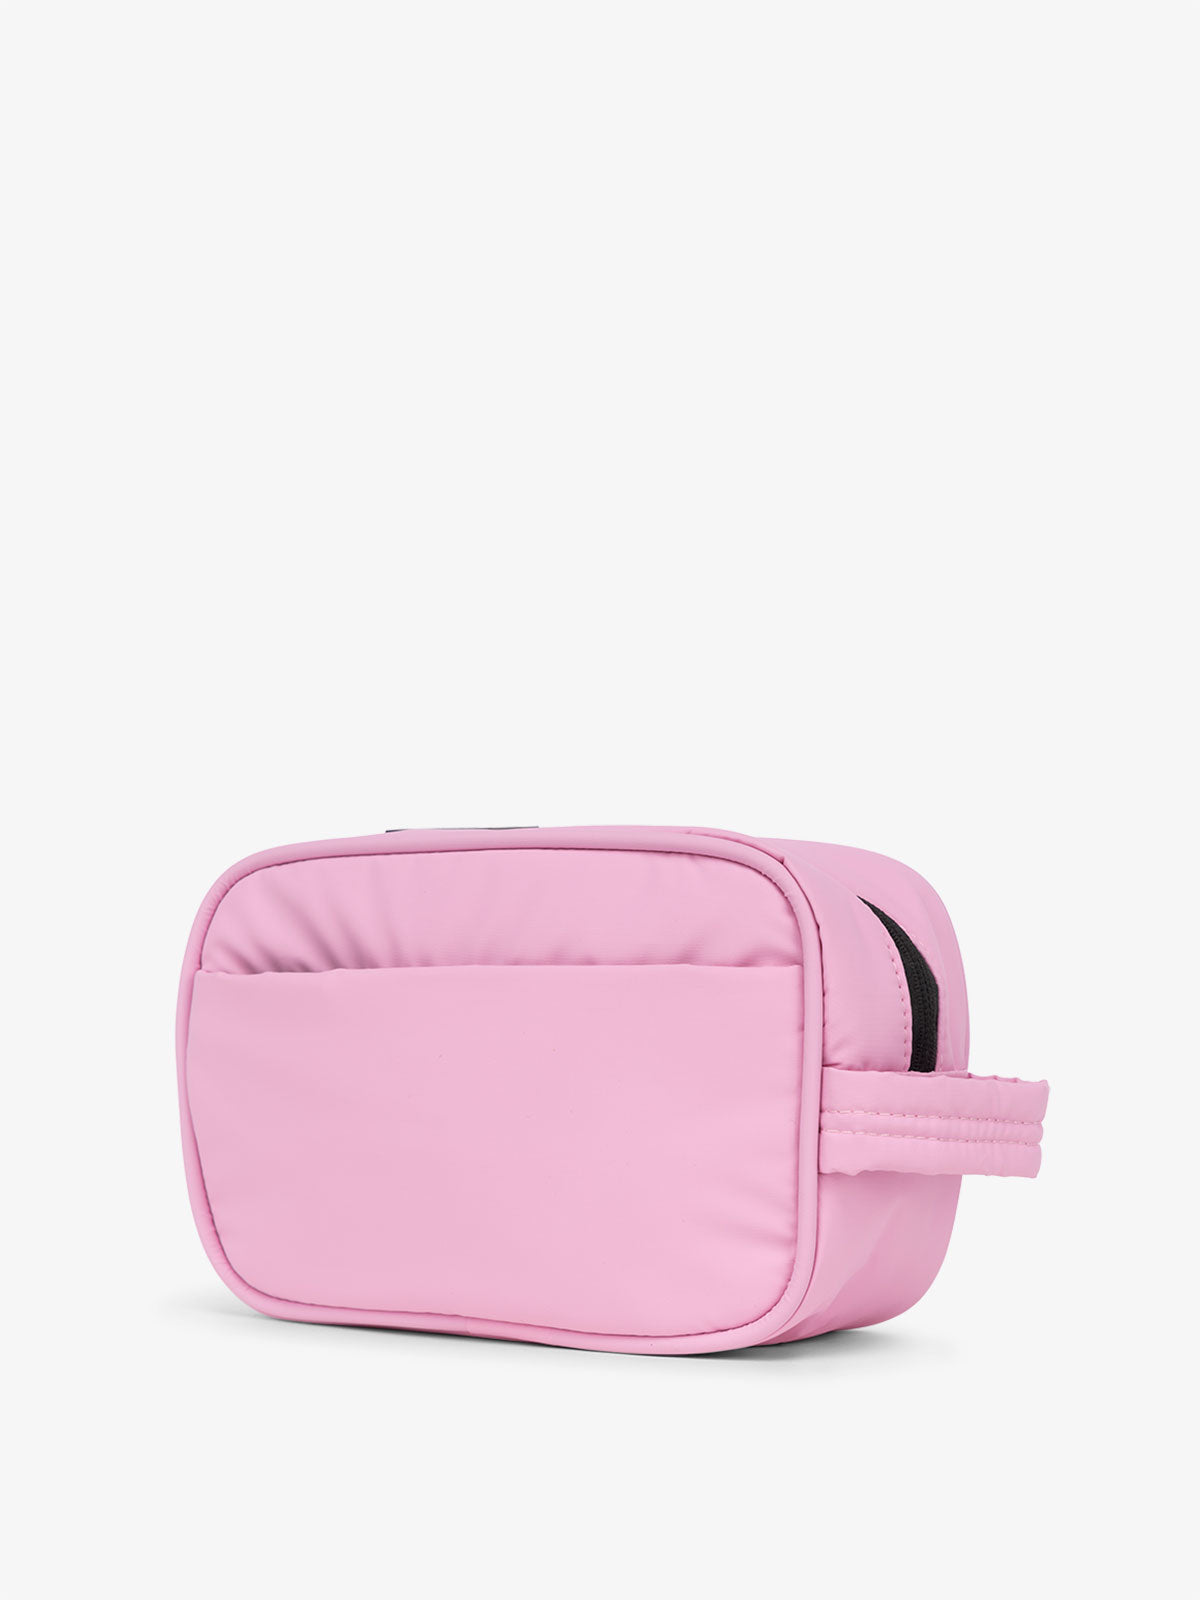 CALPAK Luka Toiletry Bag for travel organization  with soft puffy exterior and multiple pockets in bubblegum pink